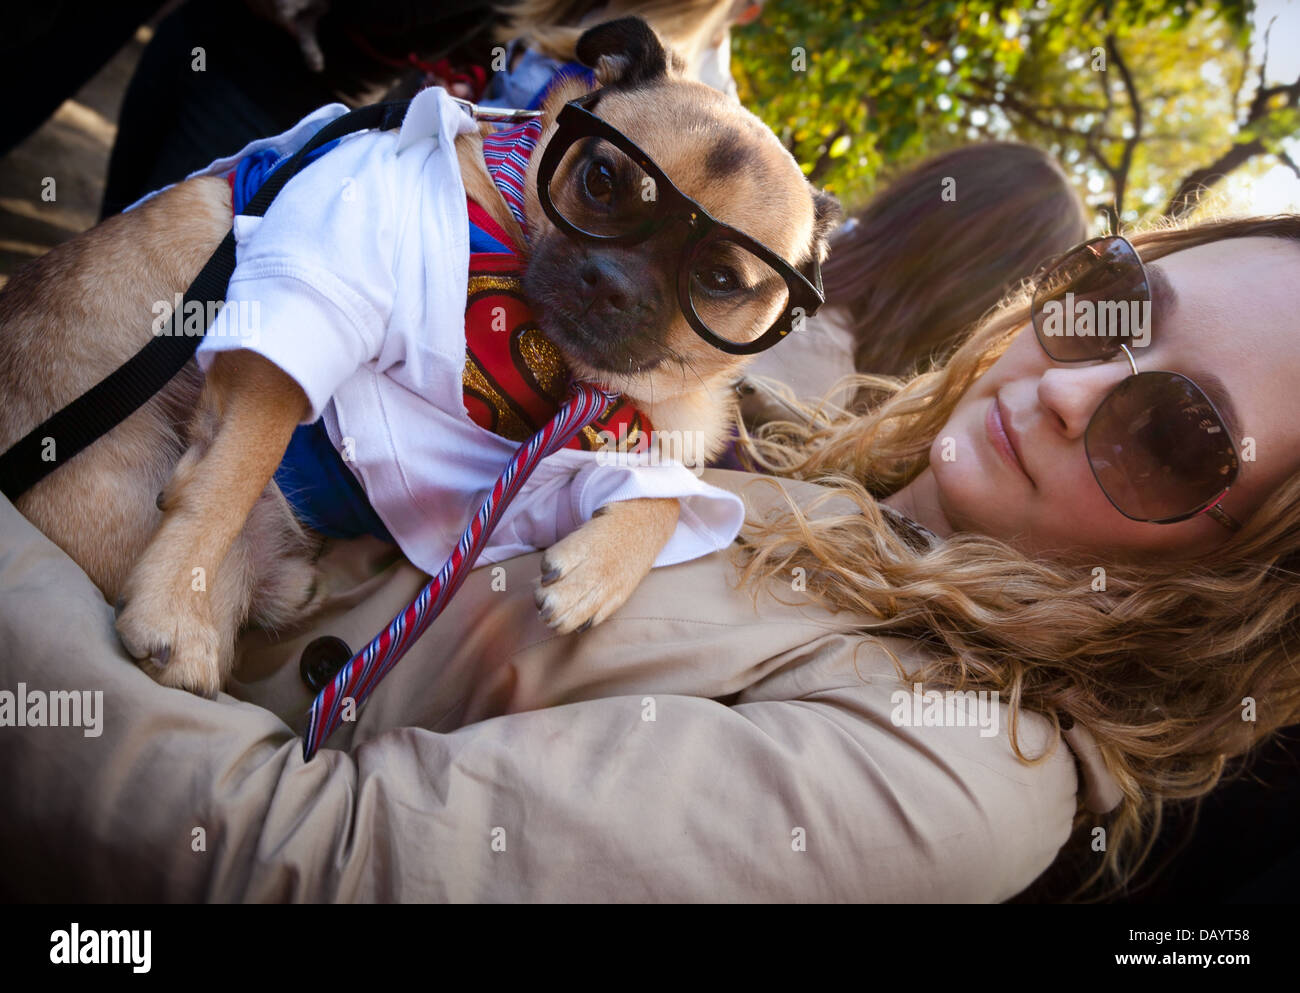 A woman and her dog, who is dressed as Clark Kent from the Superman comics, attend a Halloween costume contest in New York City. Stock Photo